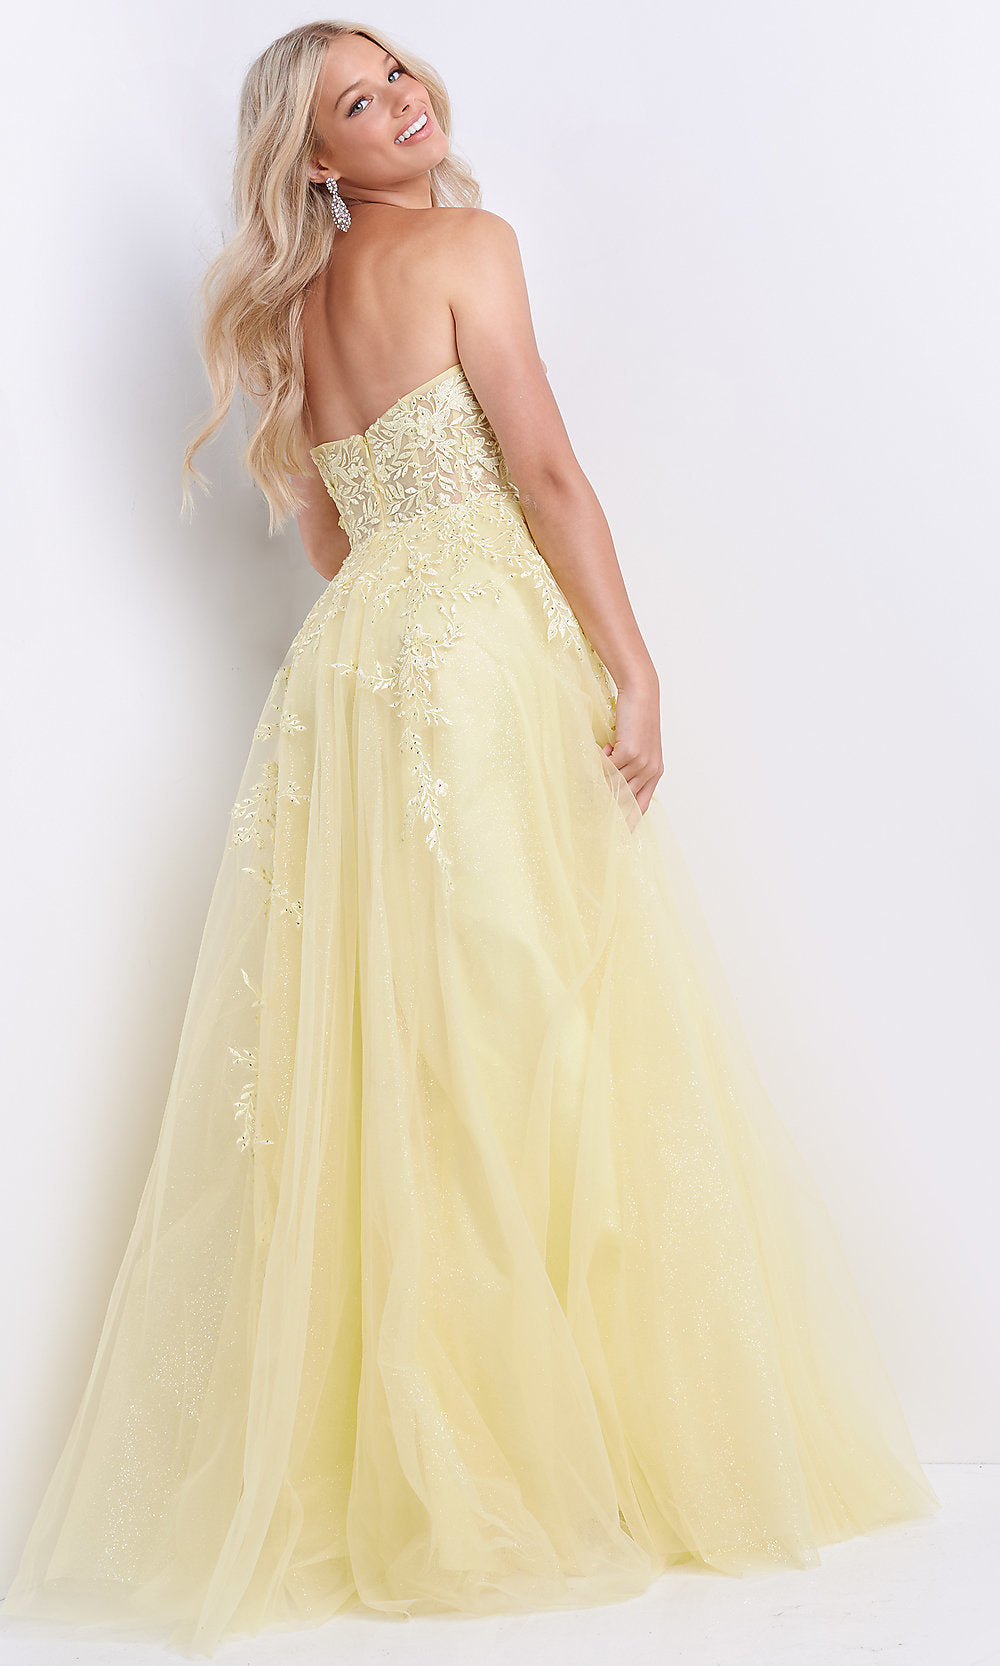  Sheer-Bodice Strapless Long Yellow Prom Ball Gown